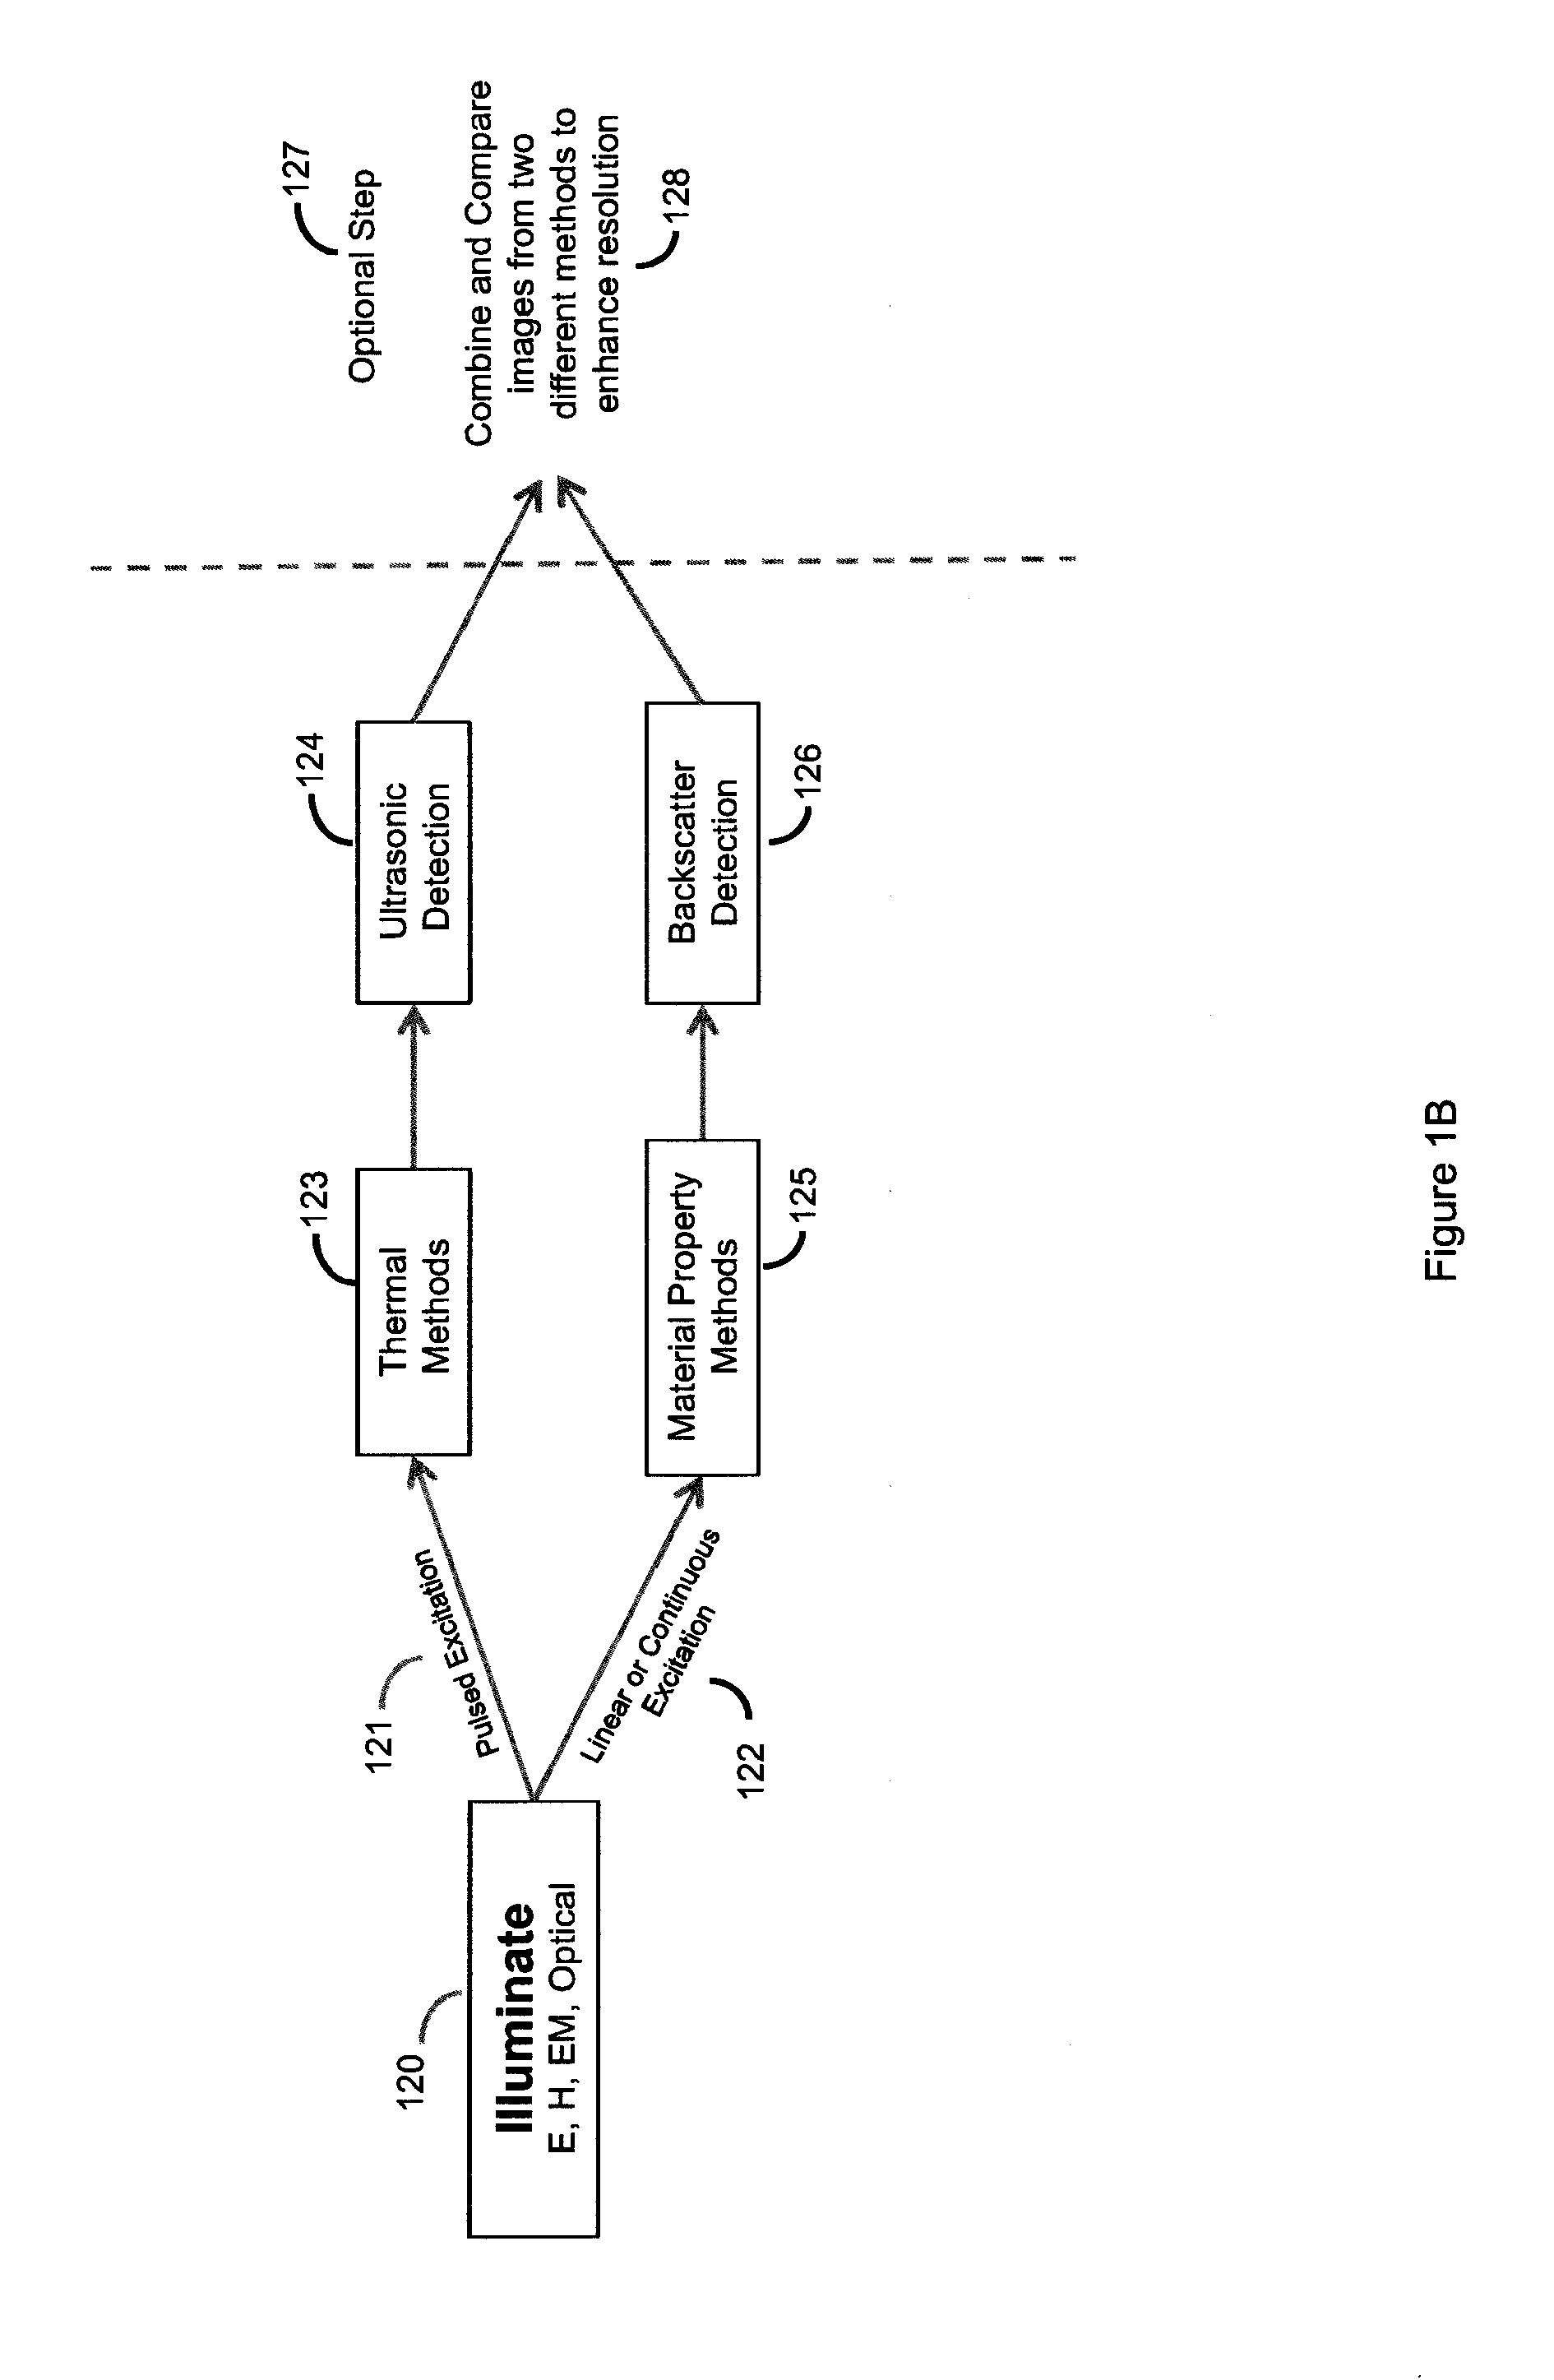 System for correlating energy field characteristics with target particle characteristics in the application of an energy field to a living organism for treatment of invasive agents